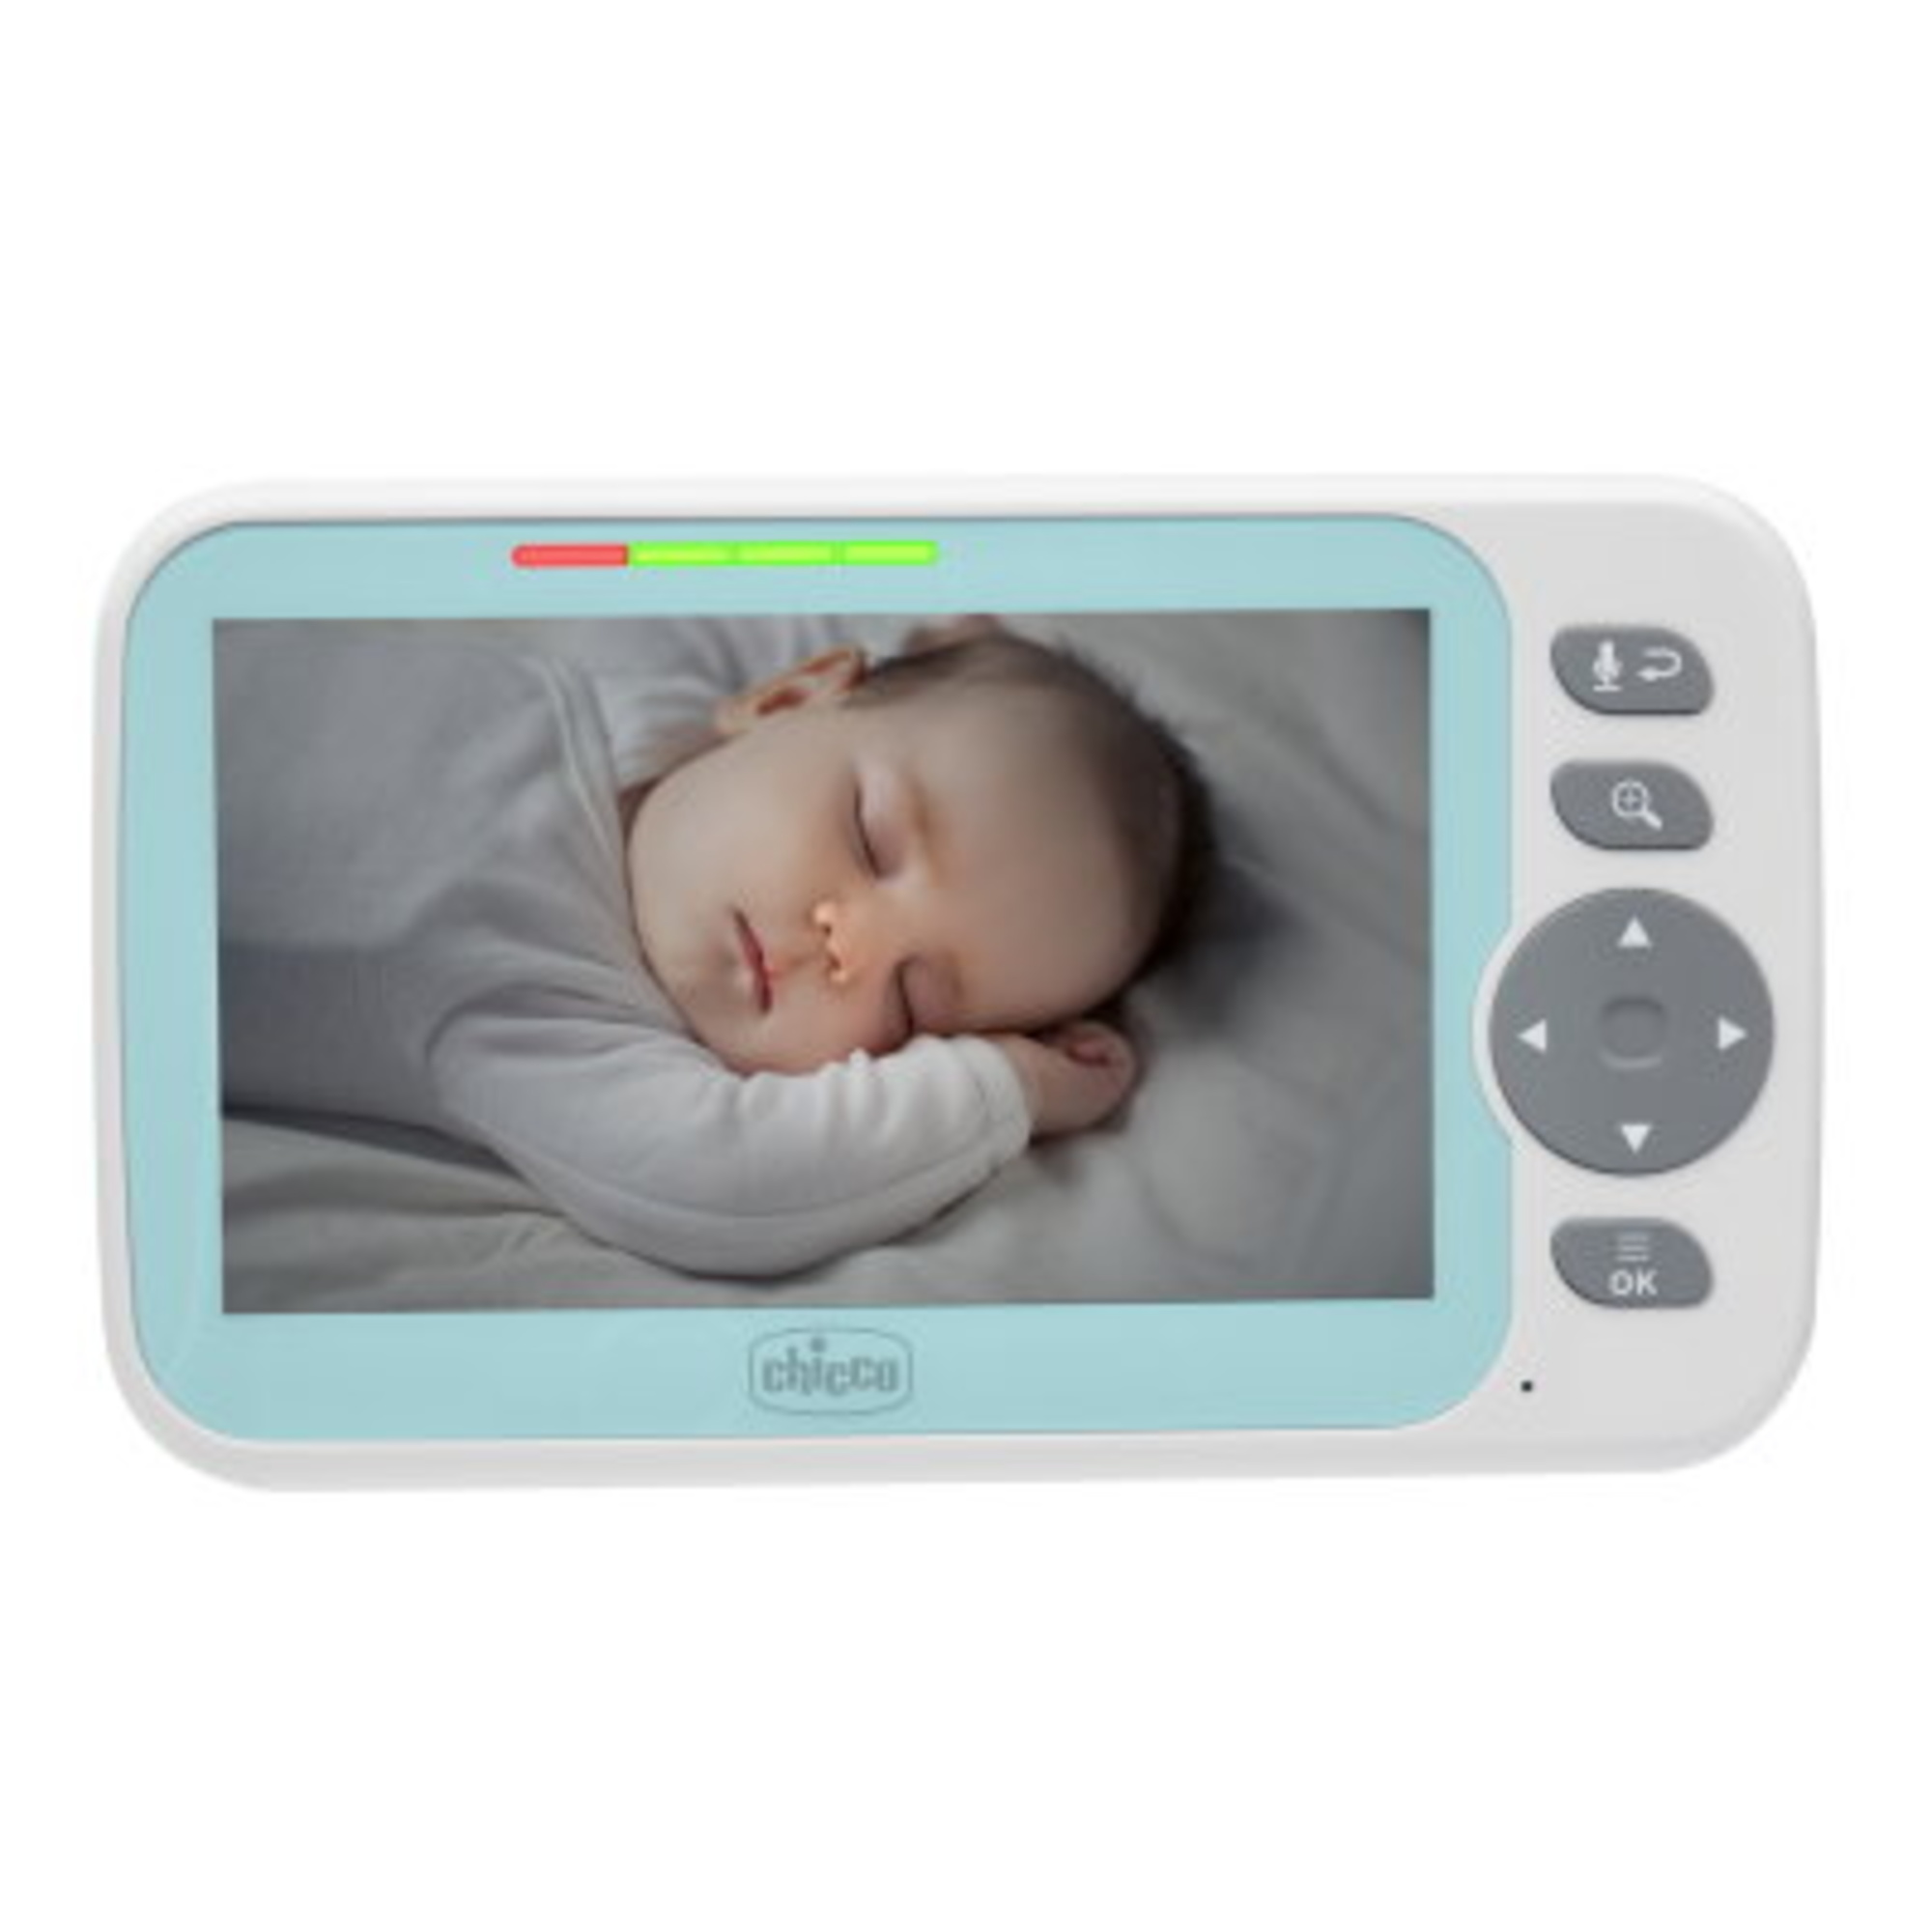 Chicco video baby monitor evolution 5" - Chicco